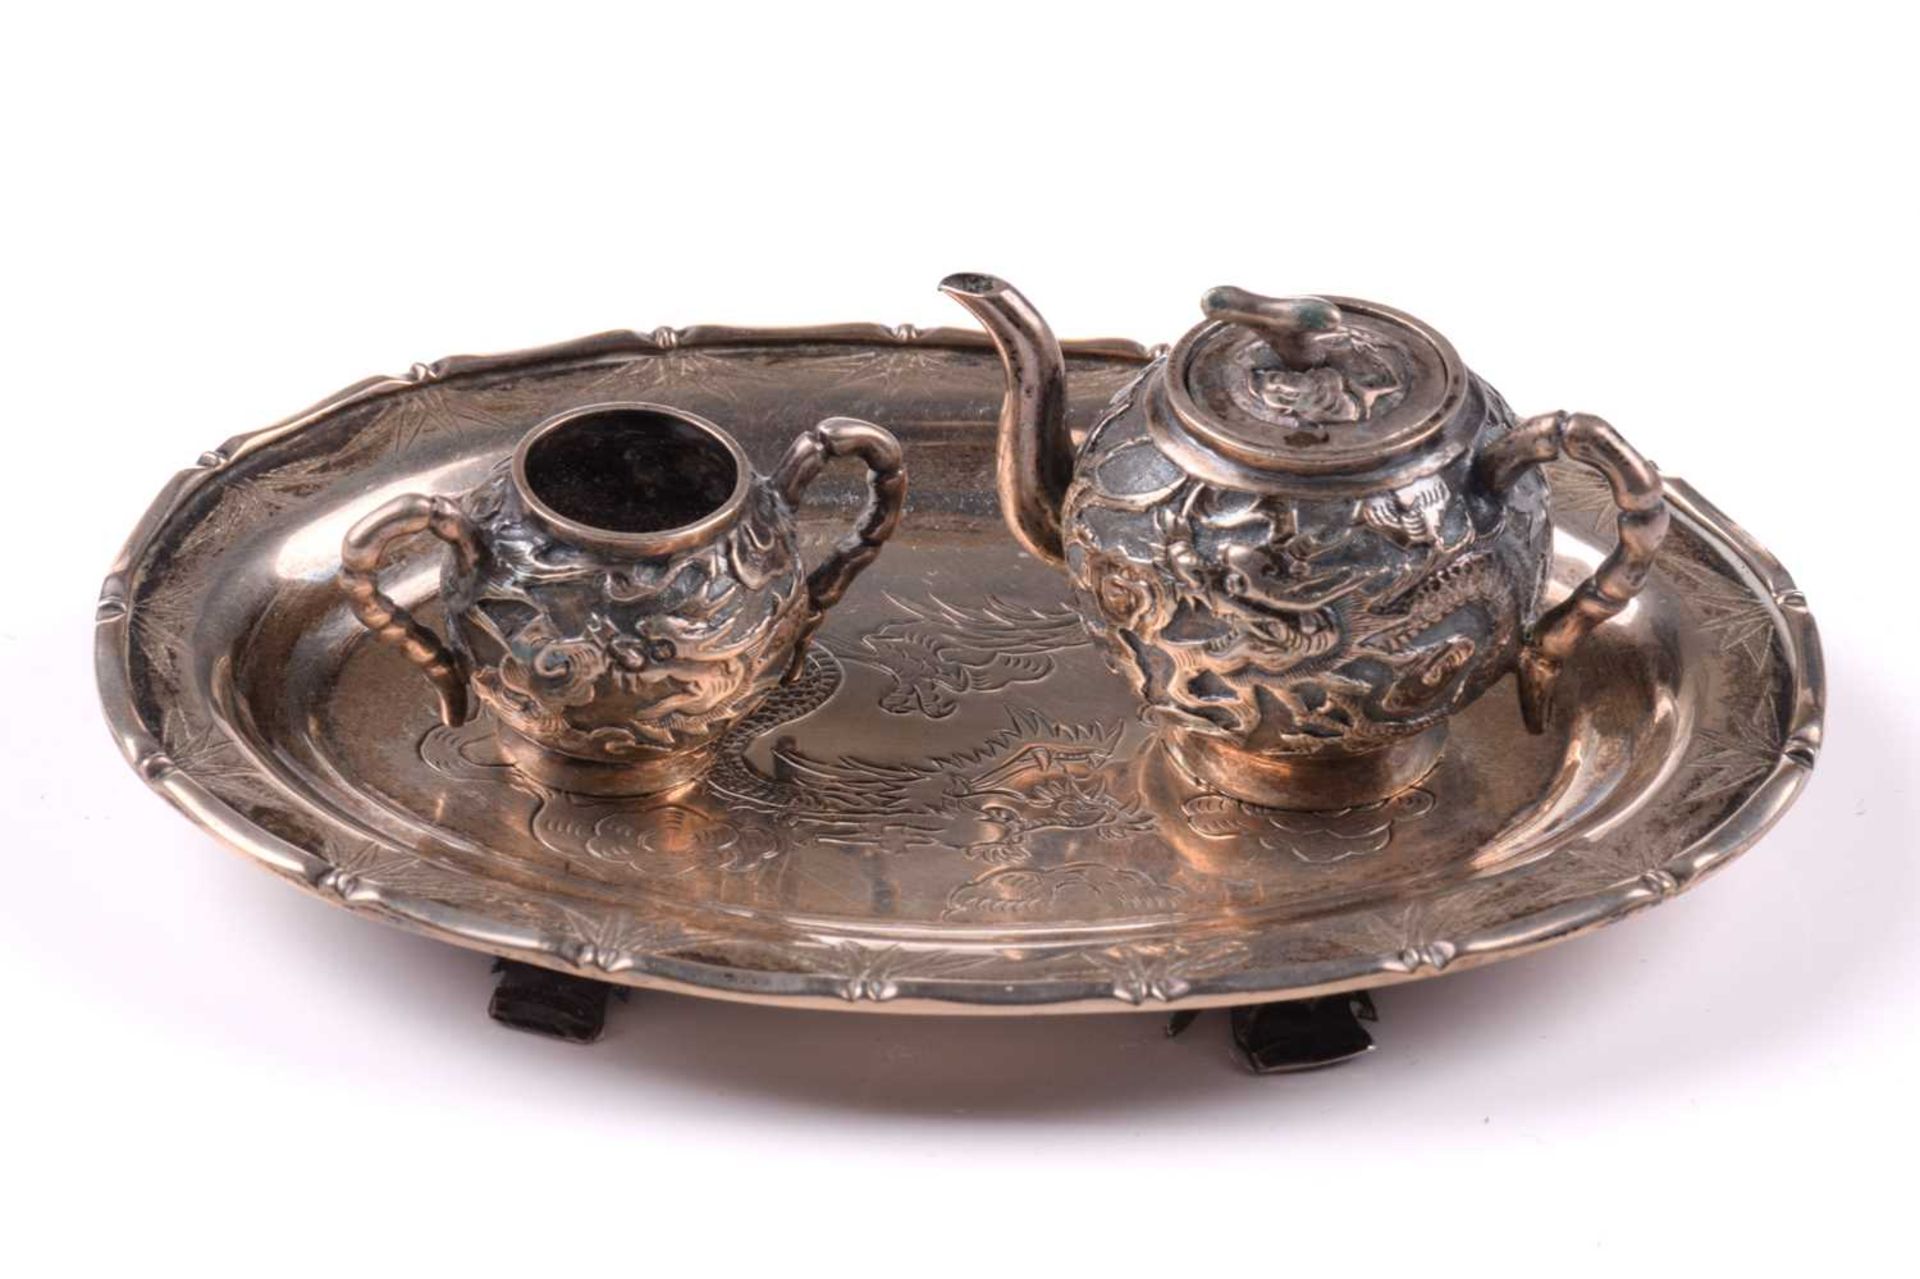 A Chinese miniature silver teapot and sugar bowl by Tuck Chang, each piece decorated with a dragon - Image 4 of 7